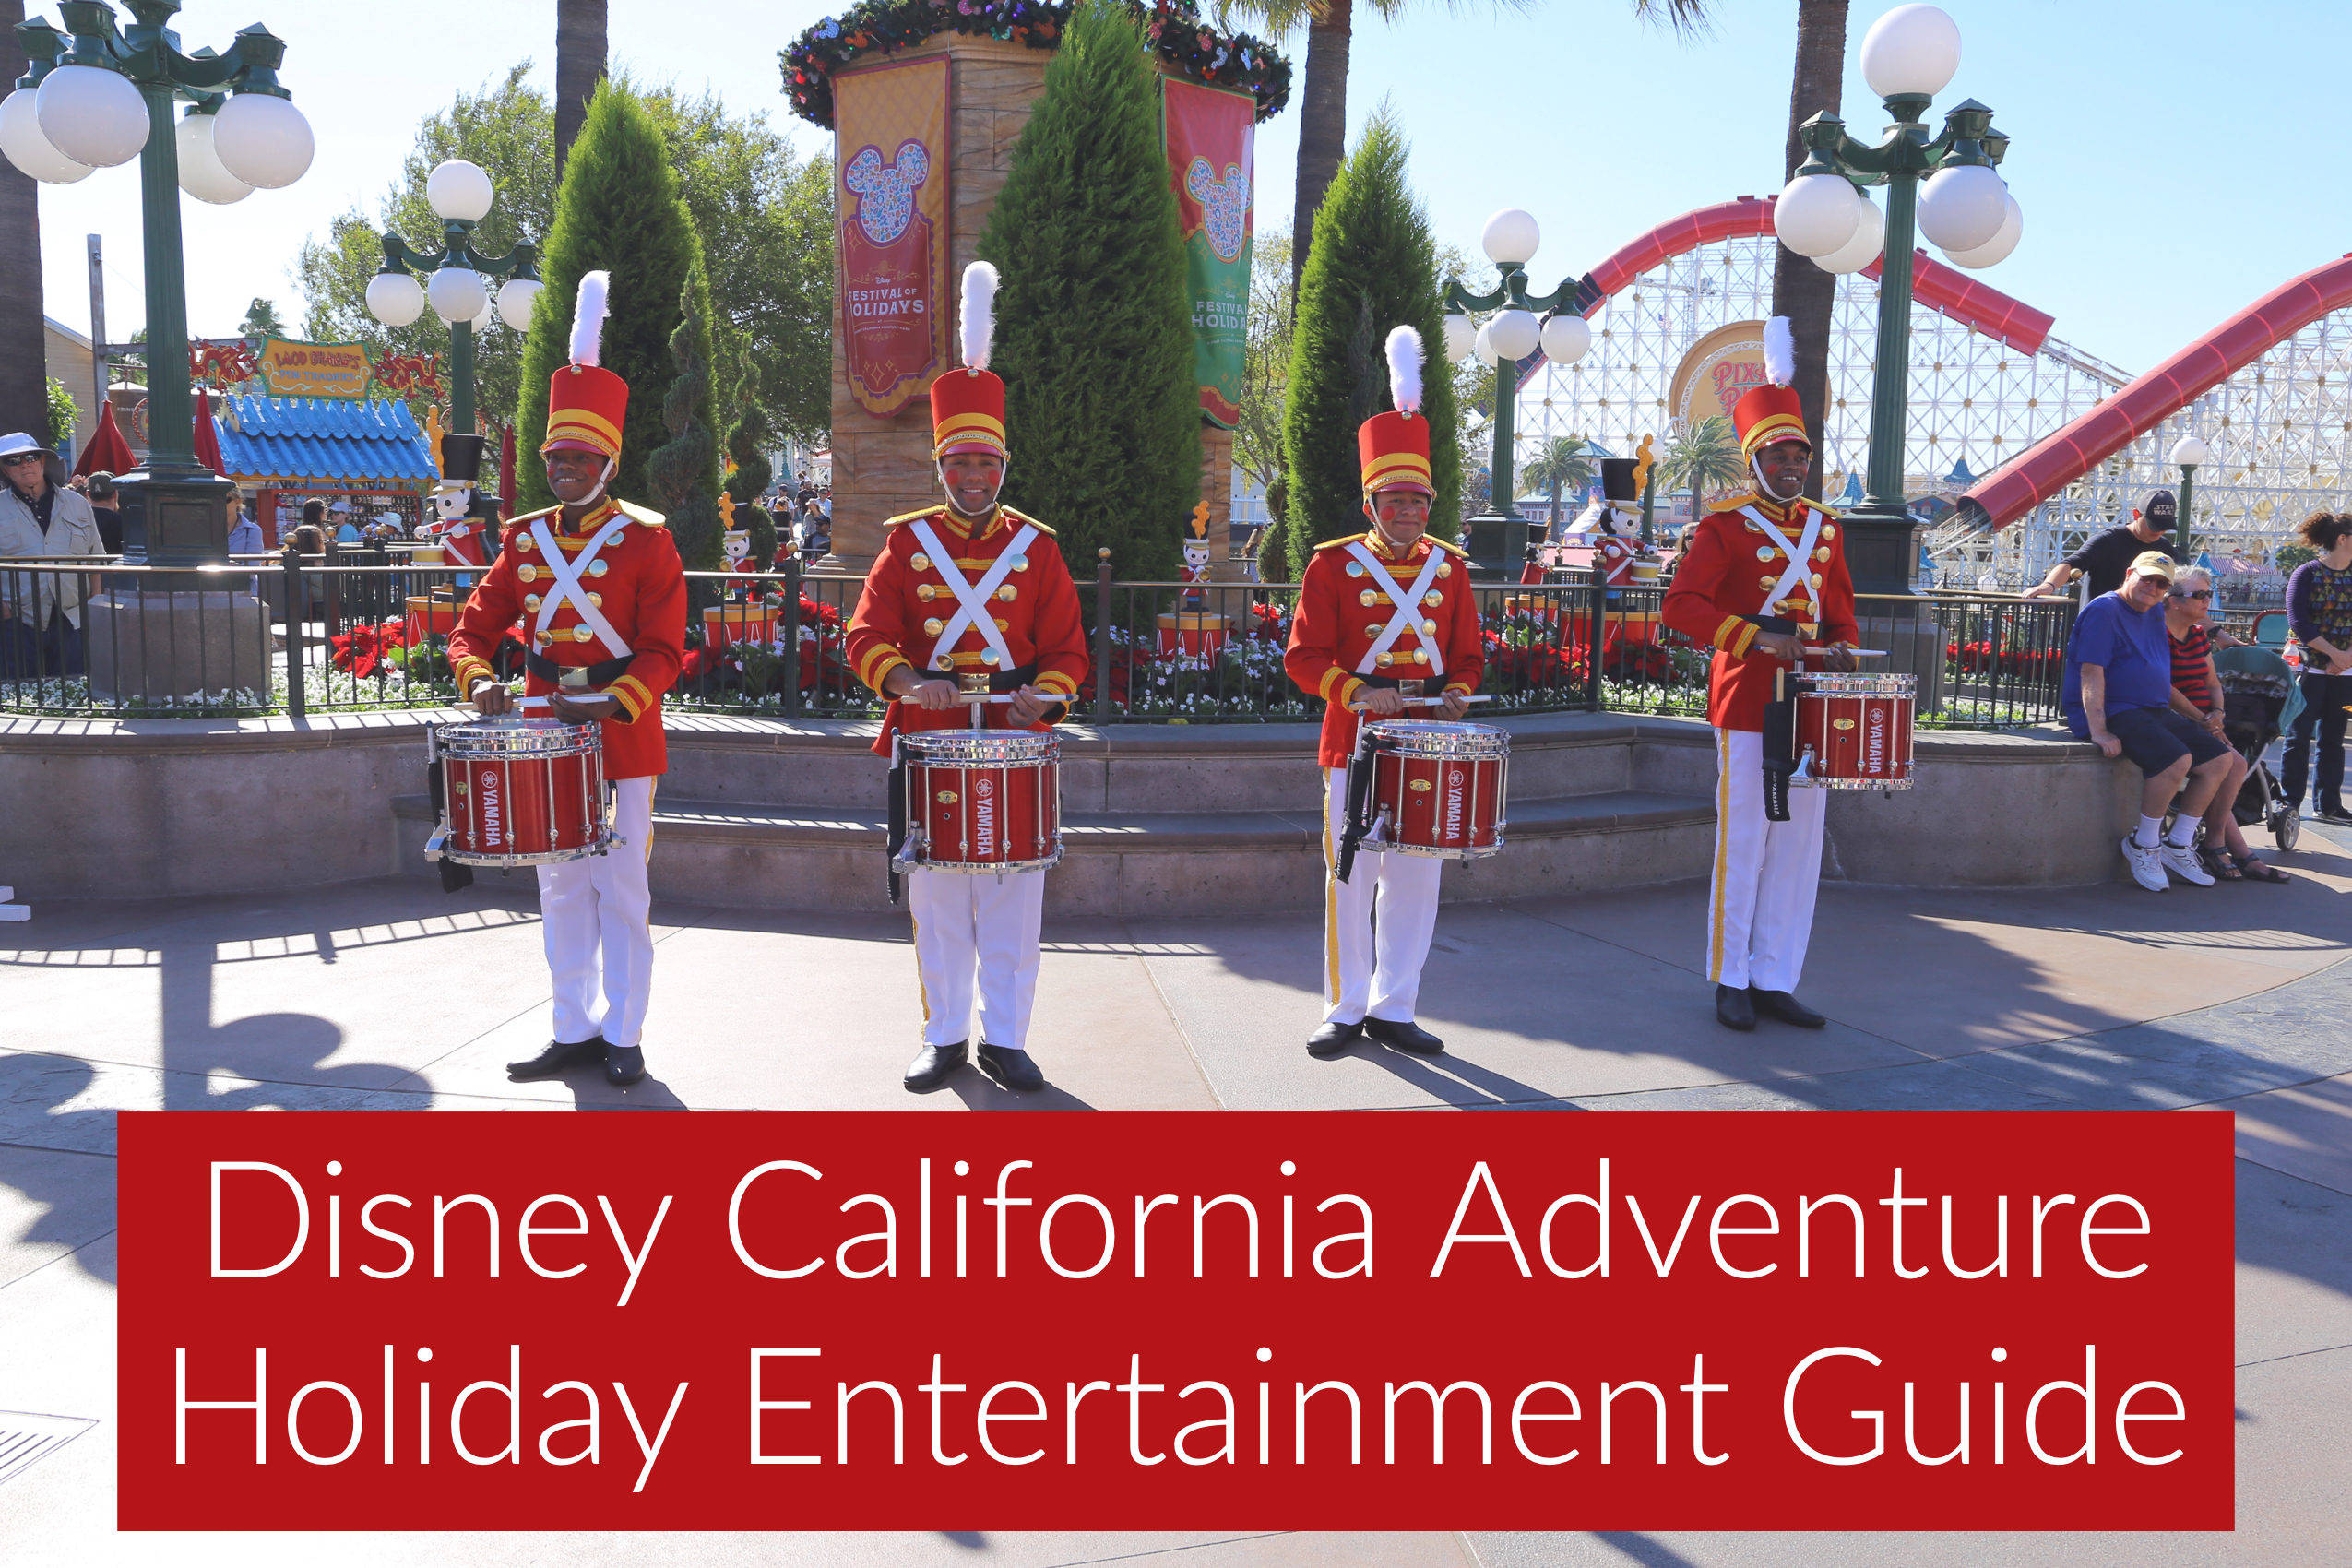 See the Magical Merriment of the Holidays Come Alive with the 2018 Entertainment Offerings at Disney California Adventure Park